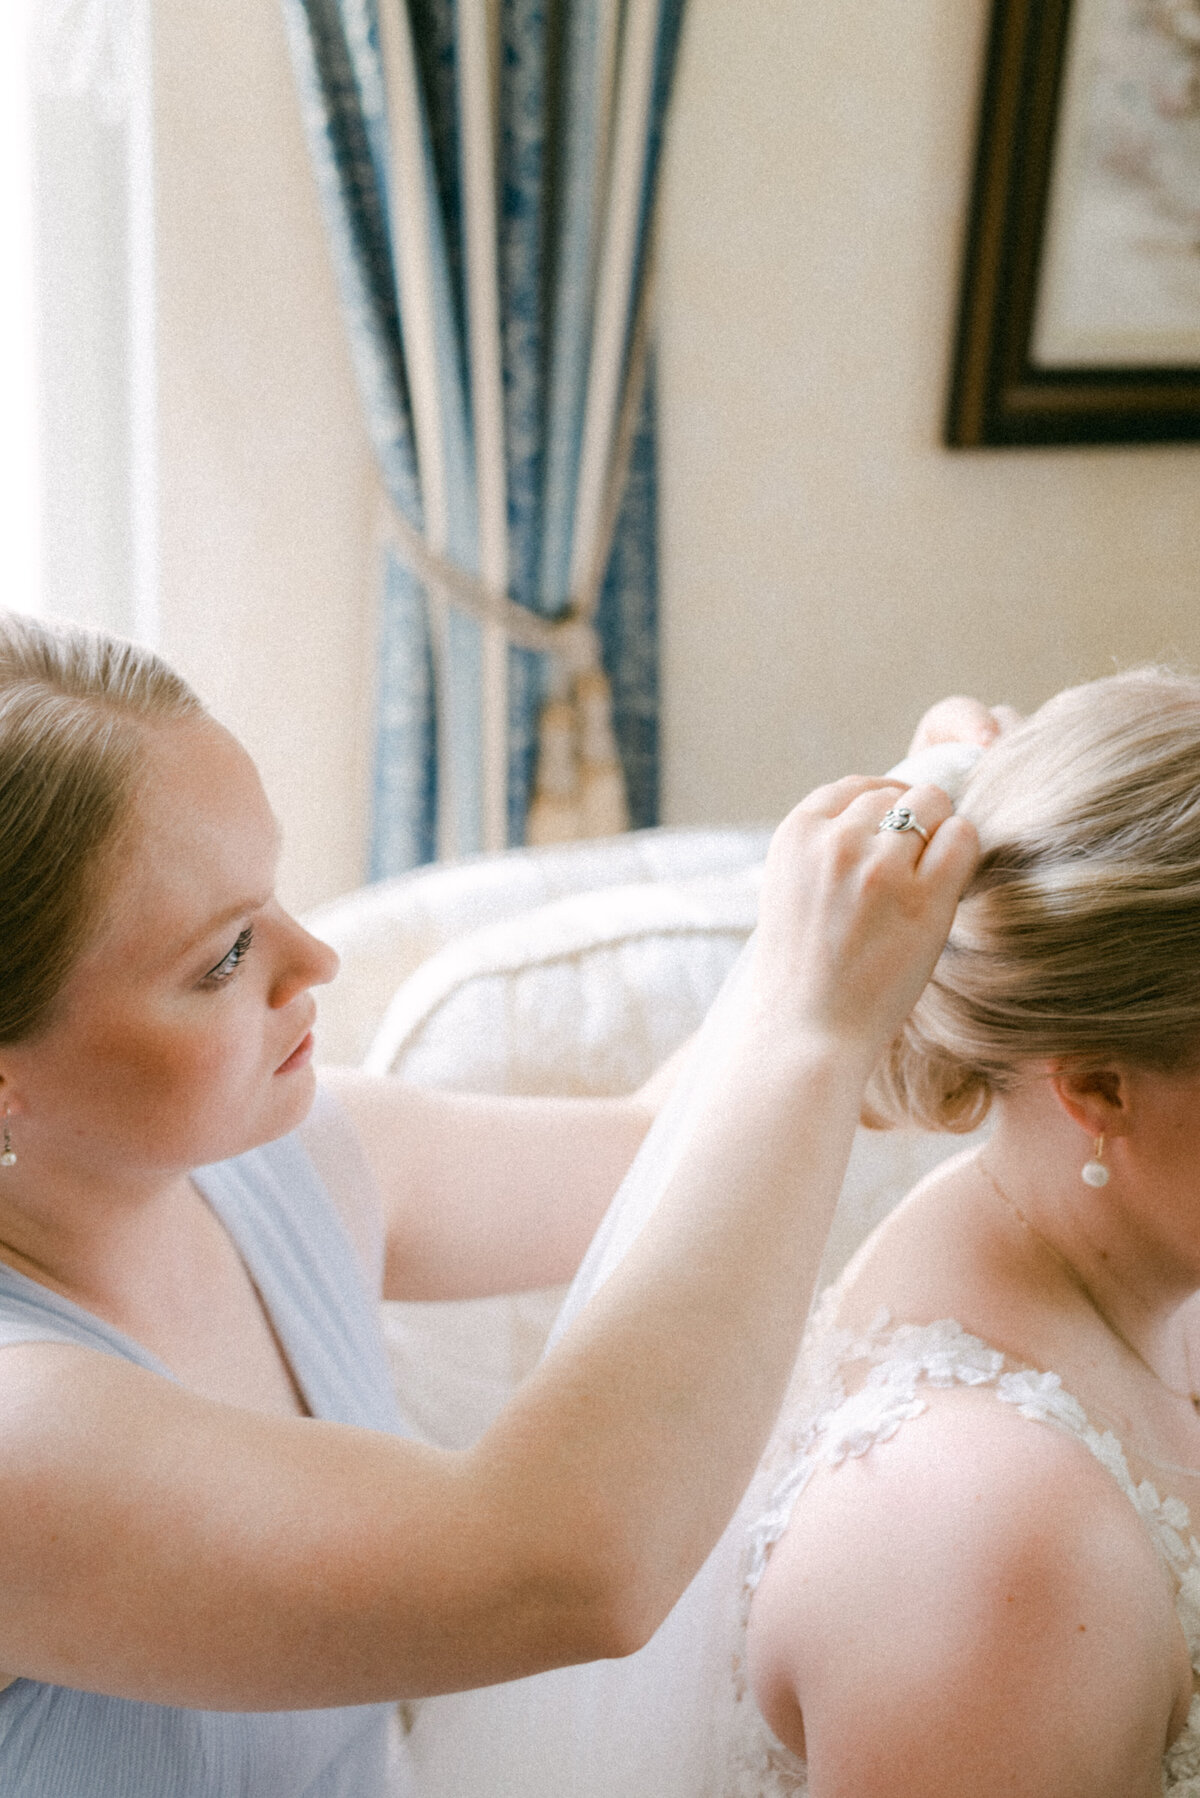 The bridesmaid helping in putting on the veil in an image photographed by wedding photographer Hannika Gabrielsson.